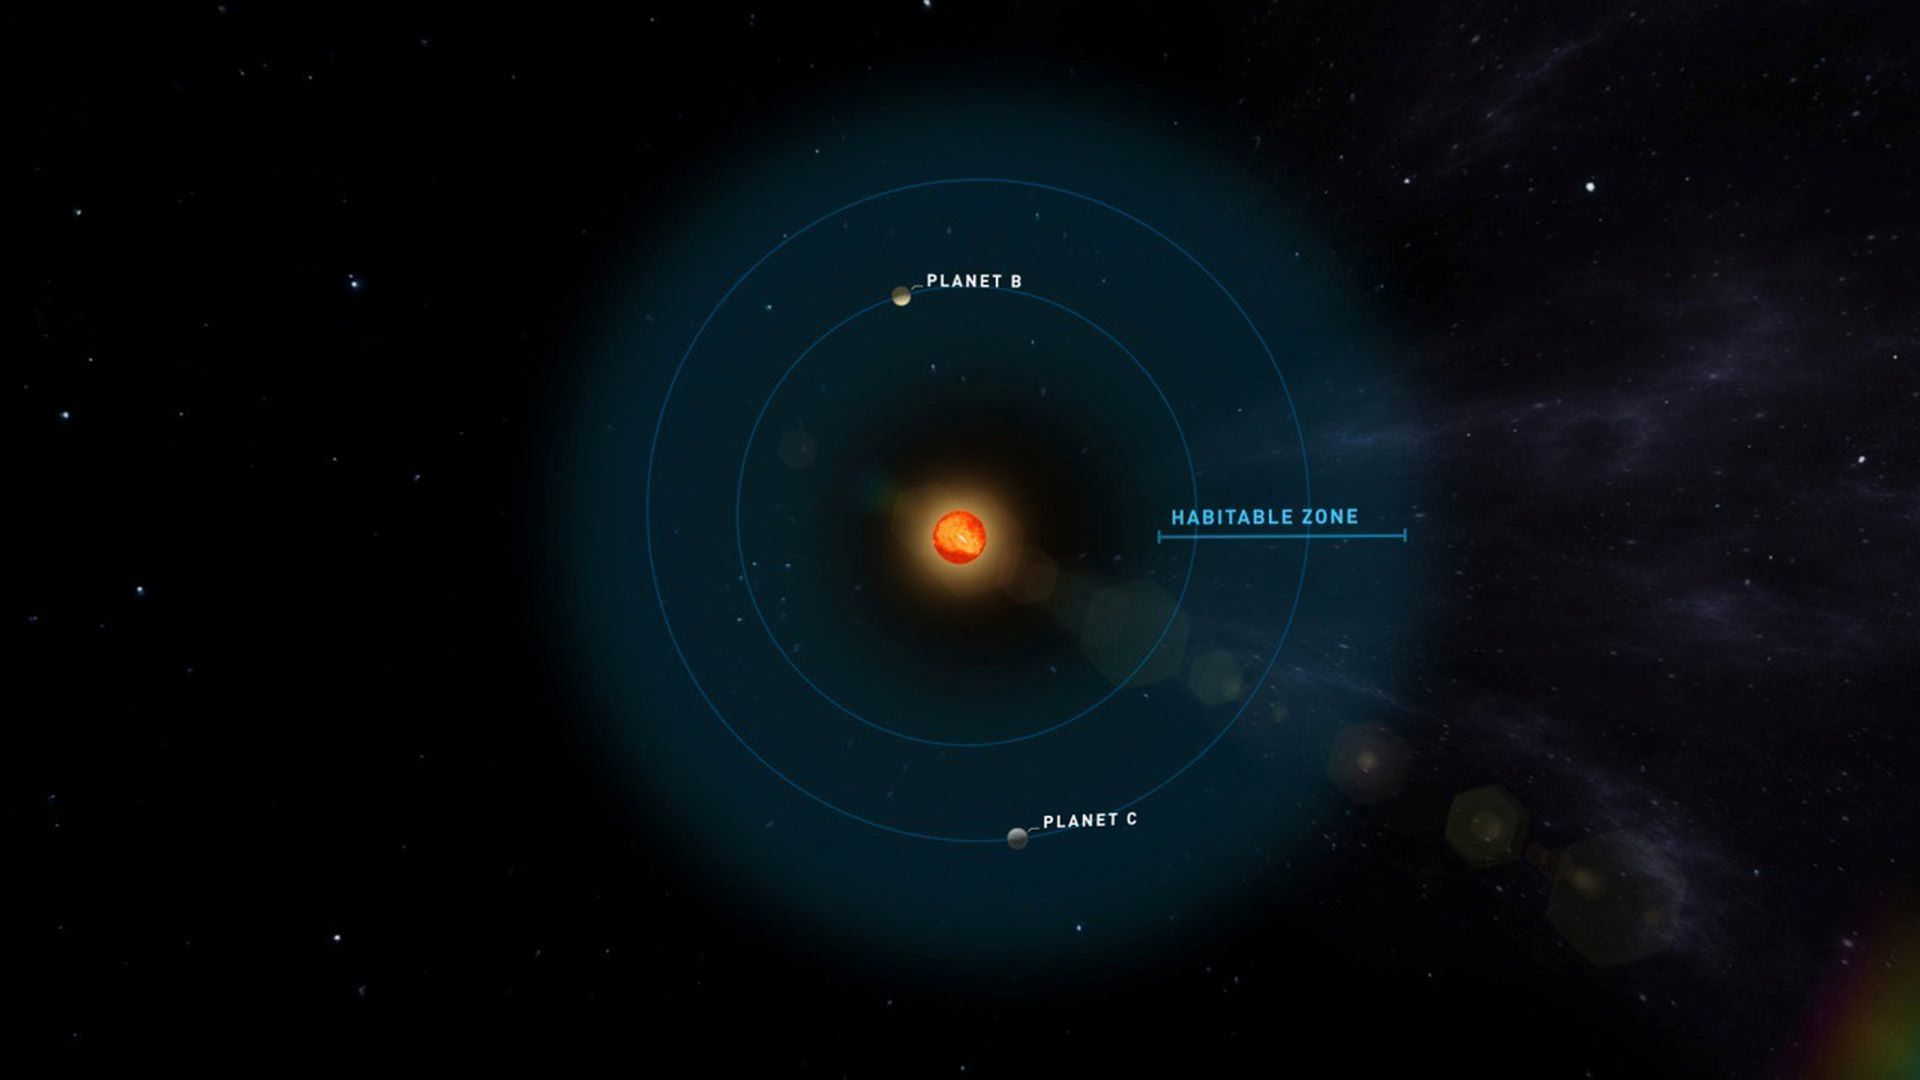 An illustration of 2 potentially habitable planets.